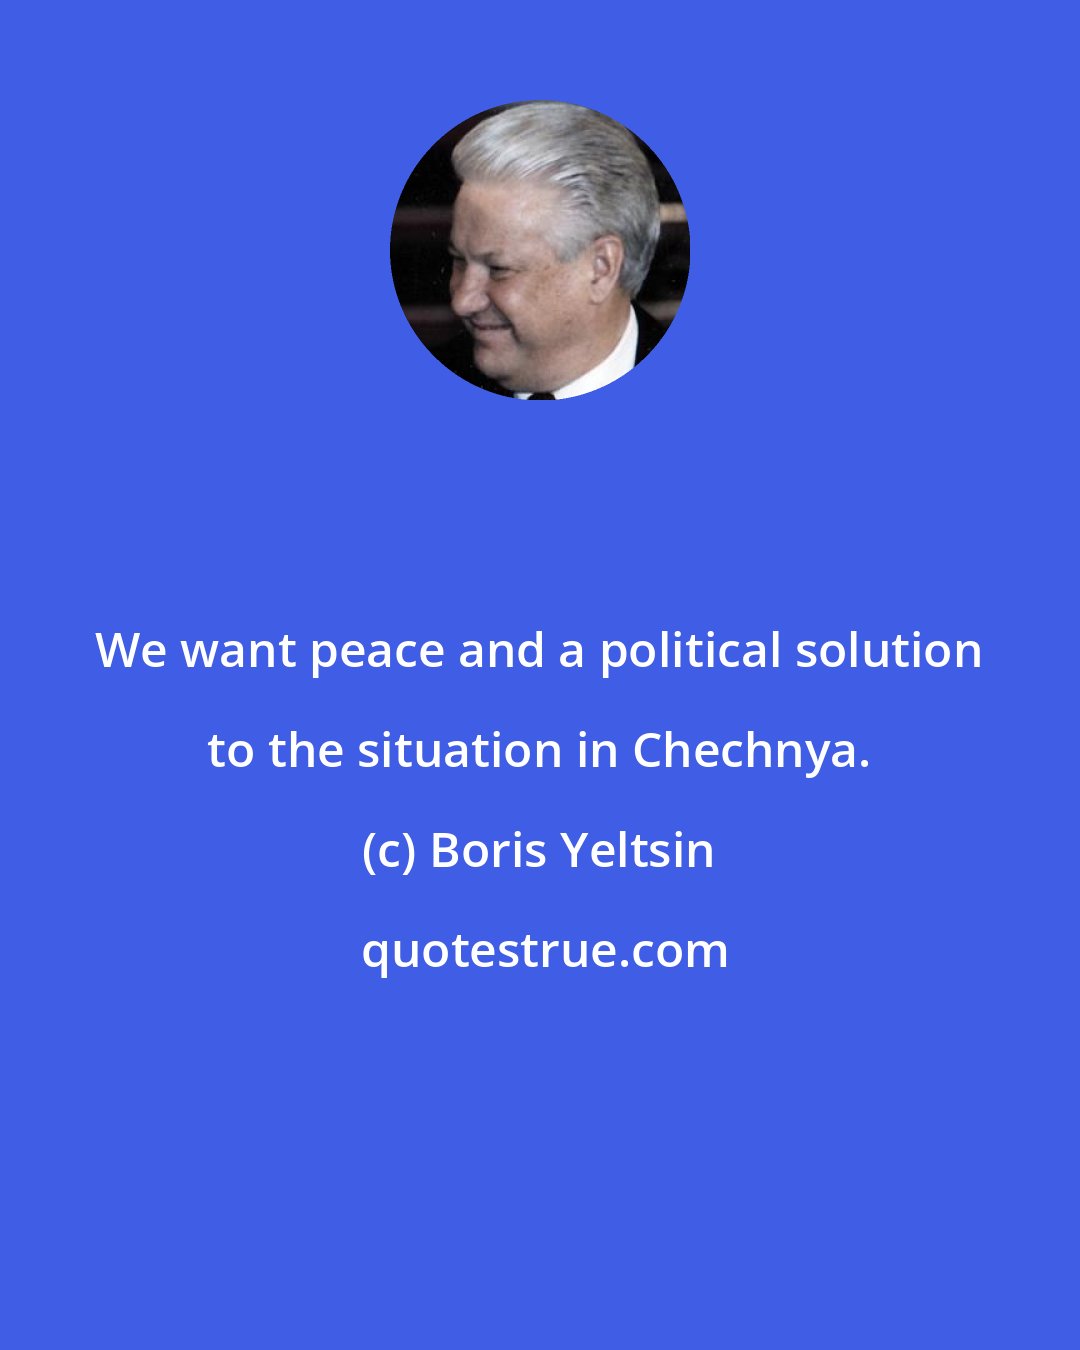 Boris Yeltsin: We want peace and a political solution to the situation in Chechnya.